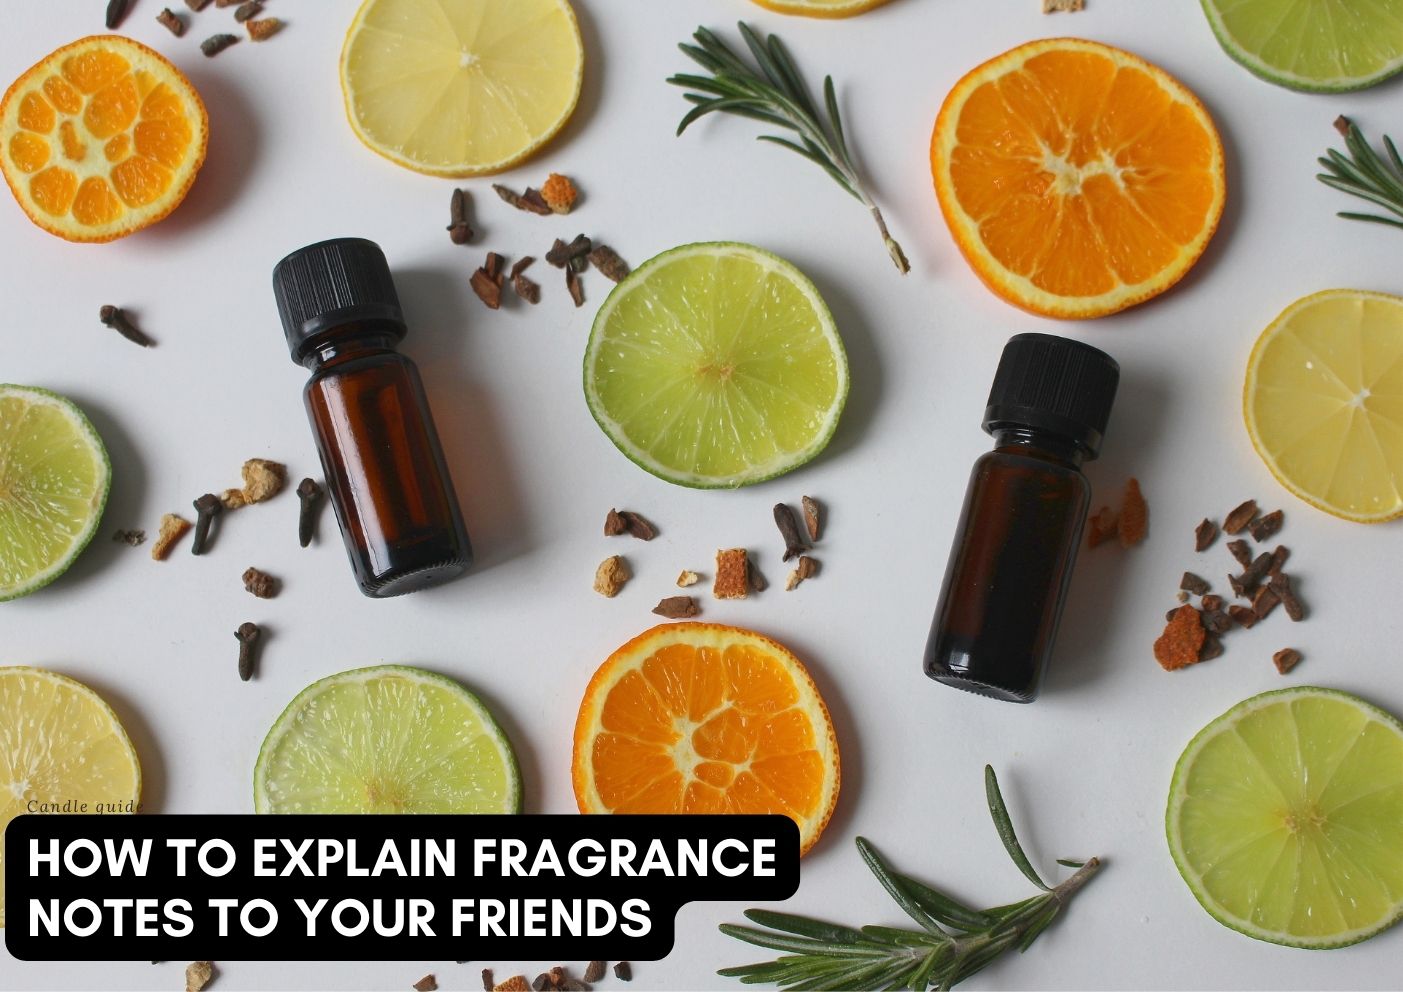 How To Explain Fragrance Notes To Your Friends